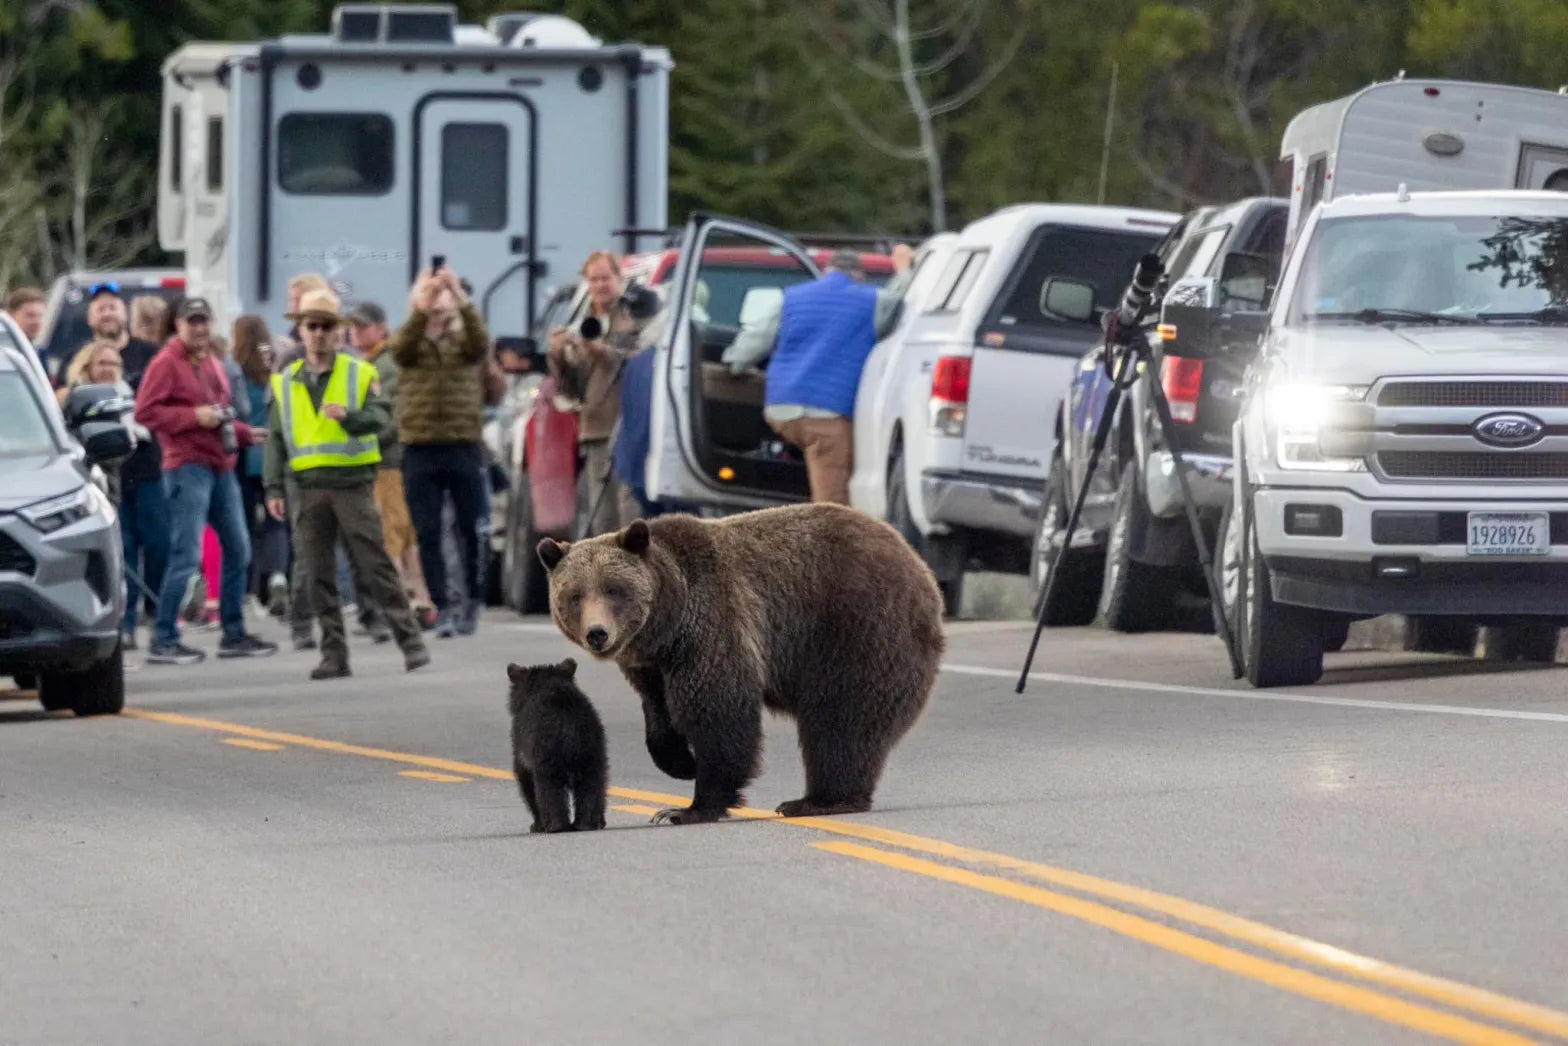 The expected emergence of 27-year-old Grizzly 399 in spring 2023 caused photographers to gather roadside in Grand Teton National Park for weeks. She emerged on May 16, lone cub in tow. (Mike Romano/Romanosphotography.com)